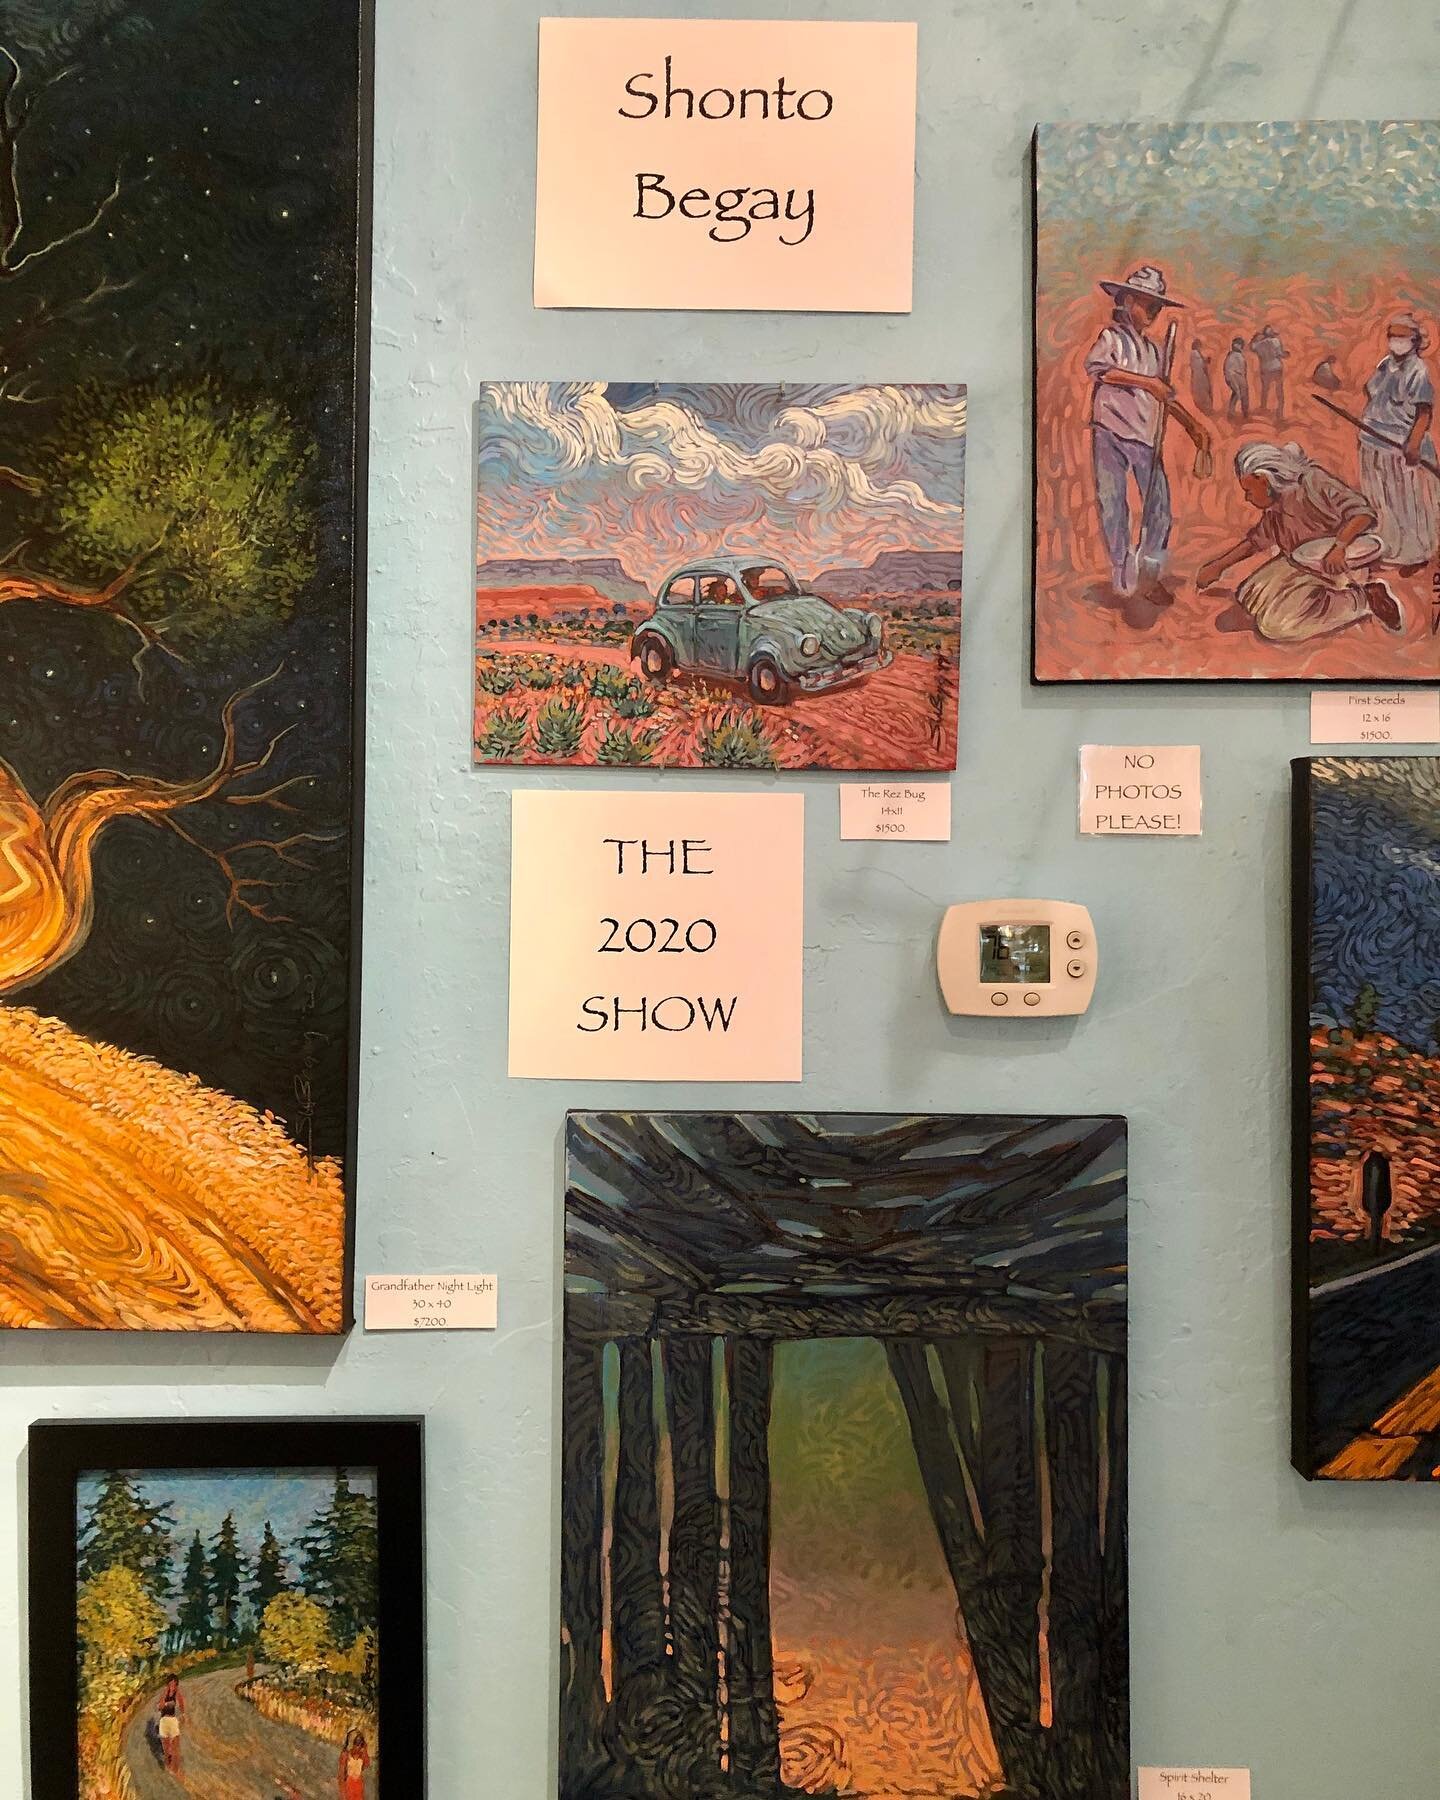 The 2020 Show, new paintings by #ShontoBegay honoring #Navajolife. Exhibit  thru July. Contact the gallery for more info. #arizonaarts #dineart #finearts #flagstaffgallery #flagstaffdba